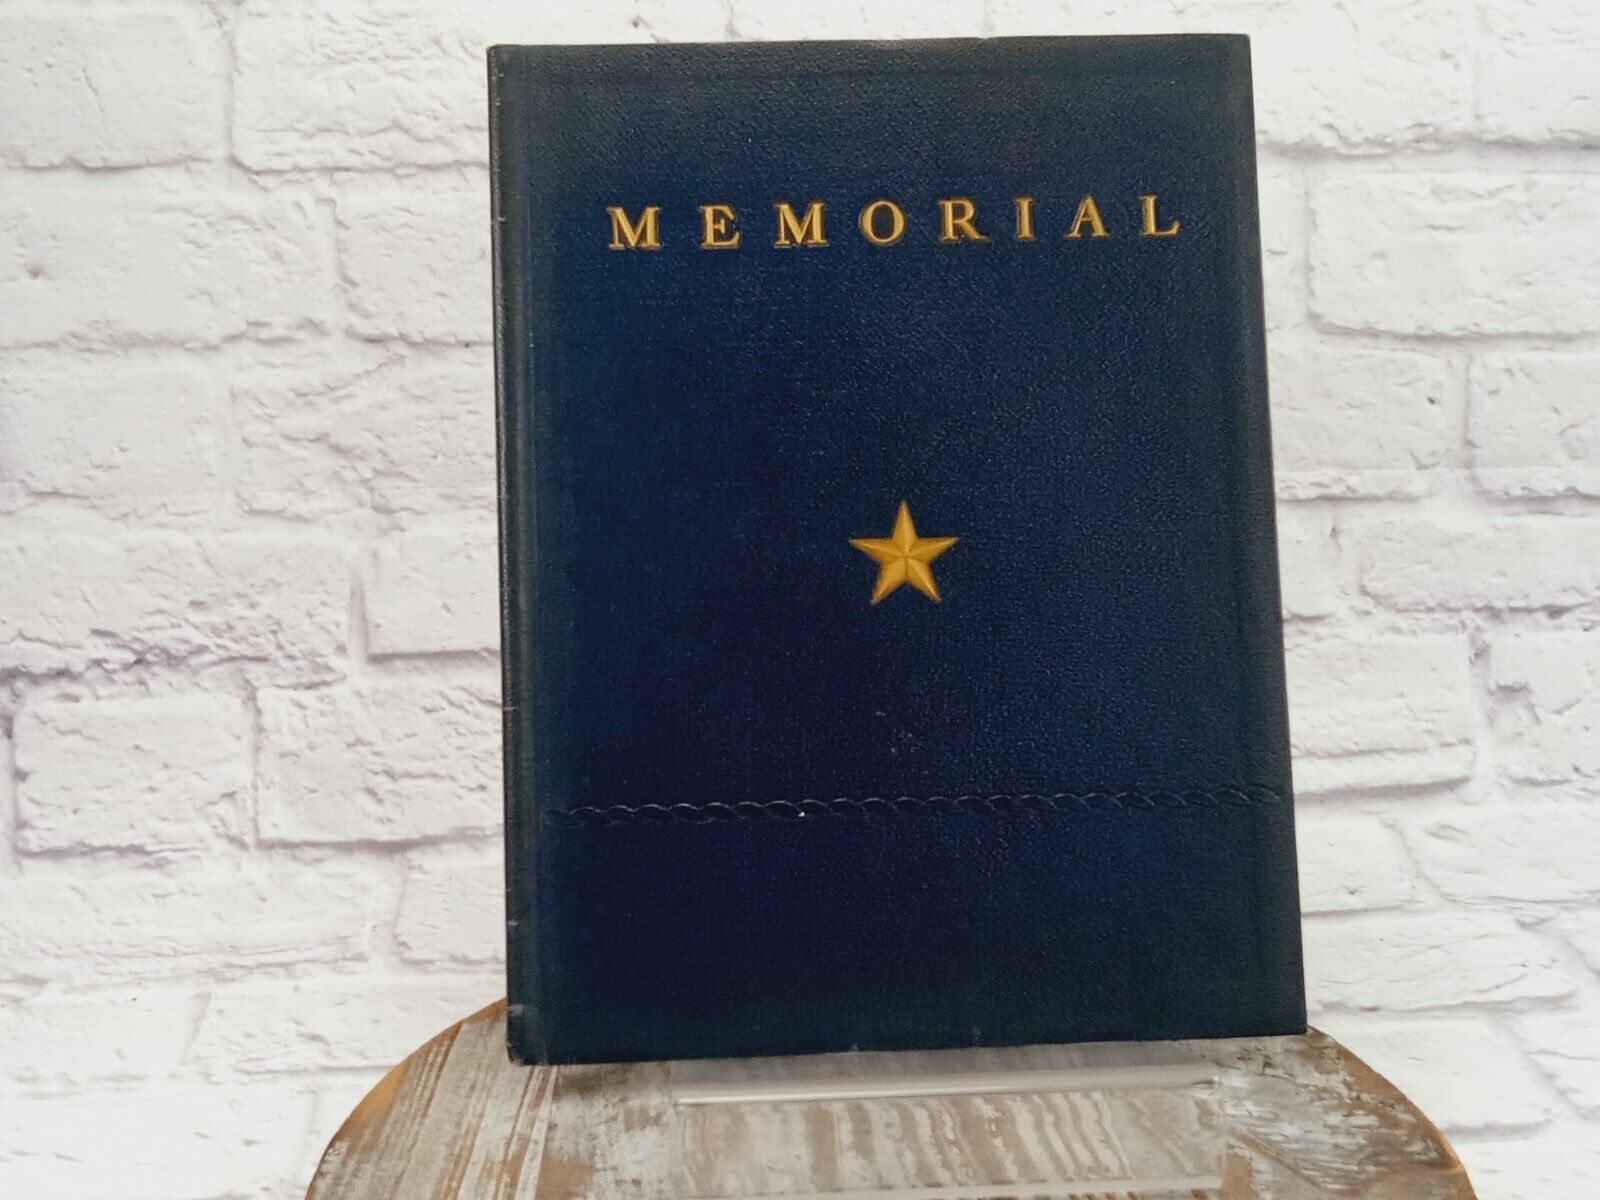 1948 IBM Endicott NY War Memorial Monument Book to Gold Star Families WWII